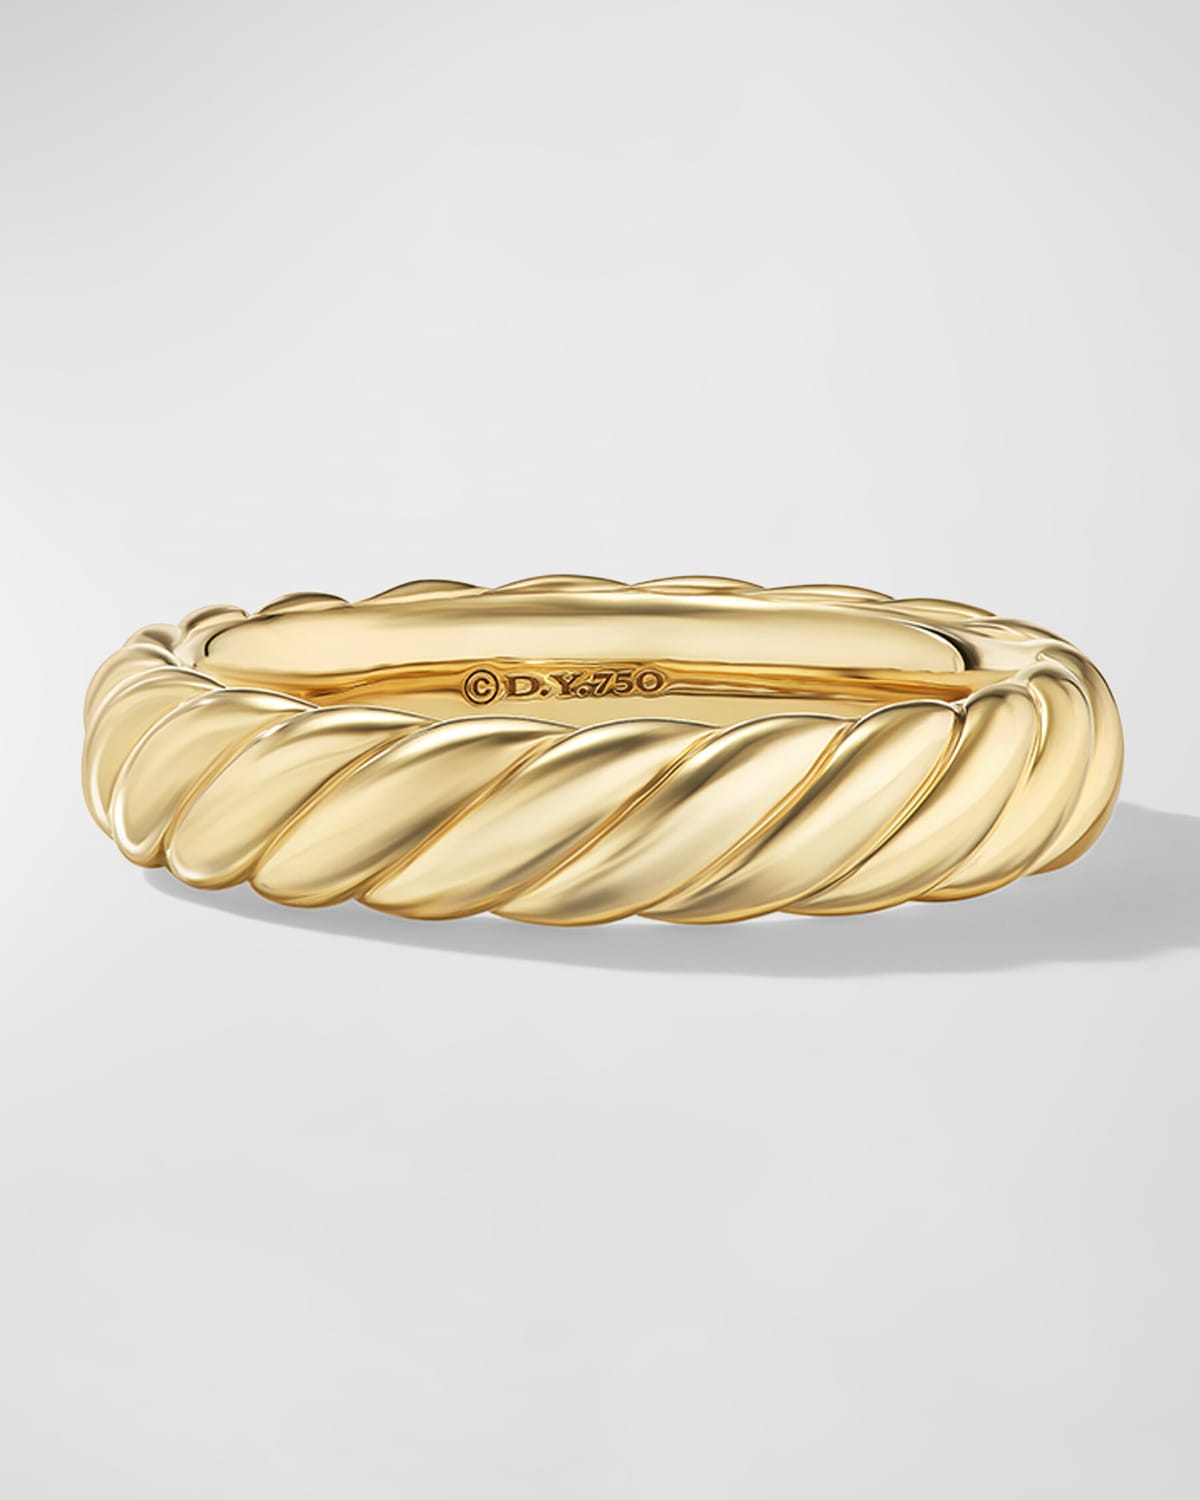 David Yurman Sculpted Cable Band Ring in 18K Gold, 4.5mm, Size 5